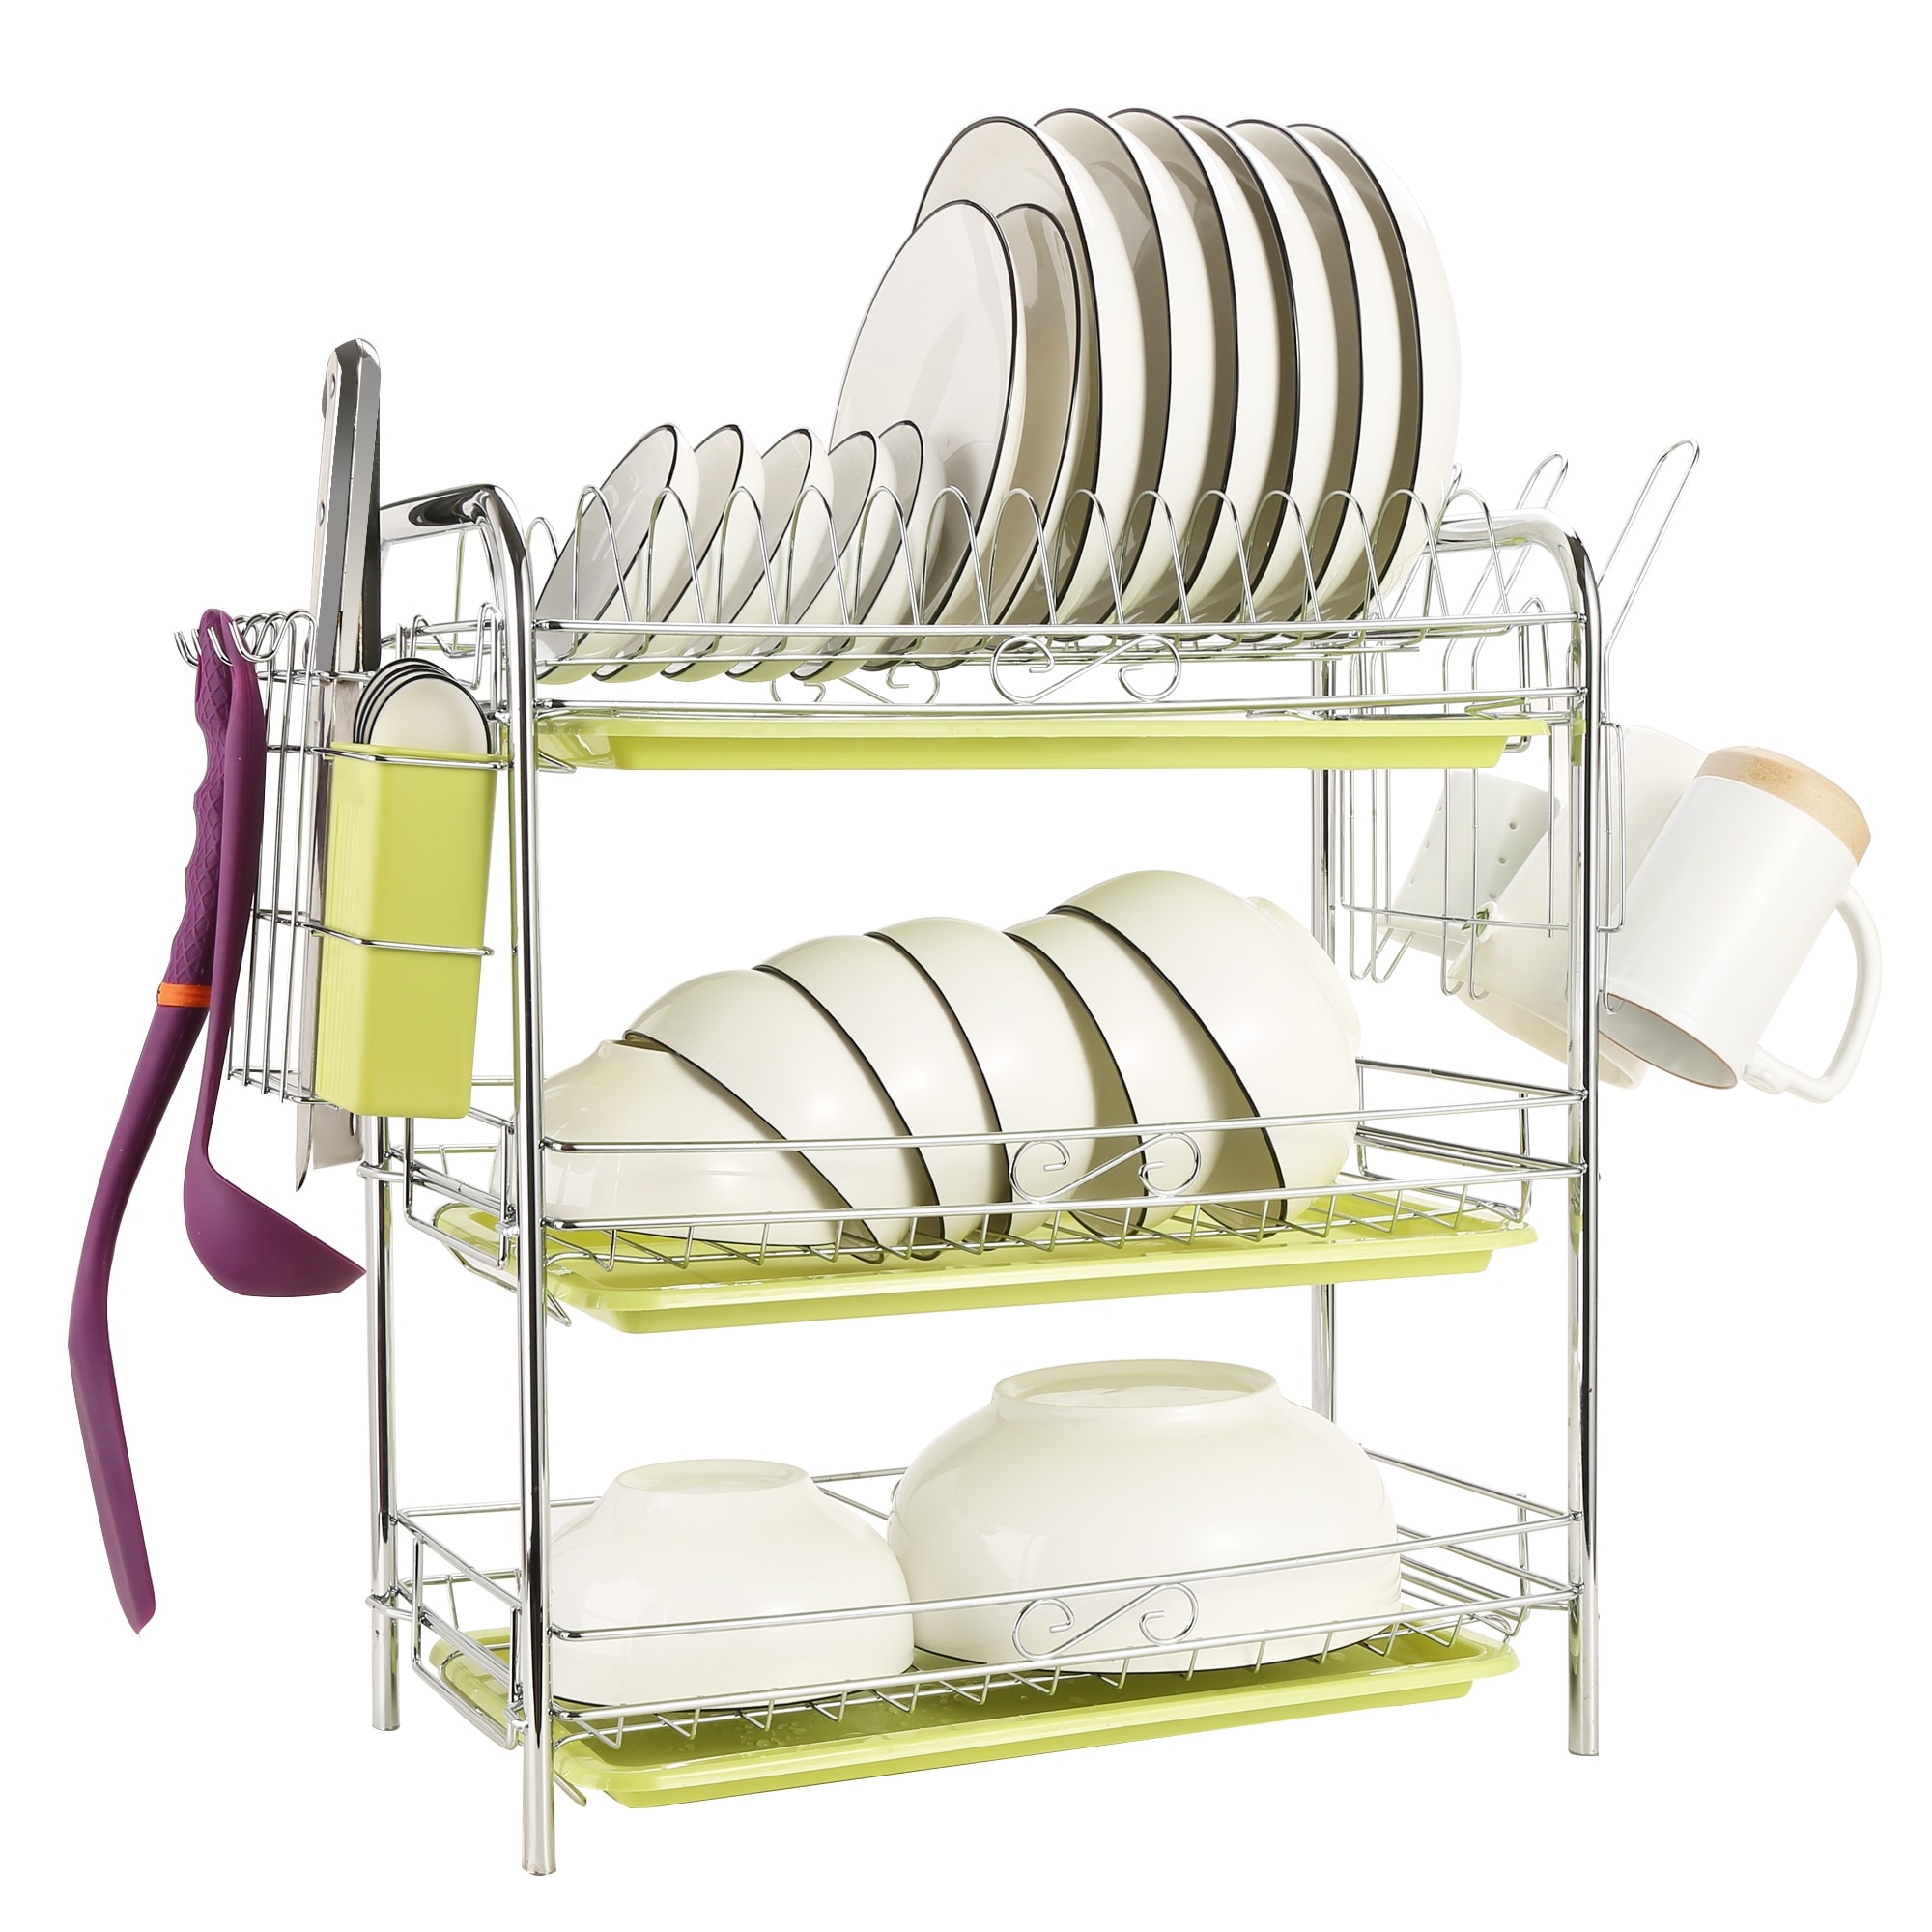 3 Level Chrome Dish Drying Rack Kitchen Dish Drainer Storage With Draining Board And Cutlery Cup 2204 X 905 X 1850 In Overstock 29211826